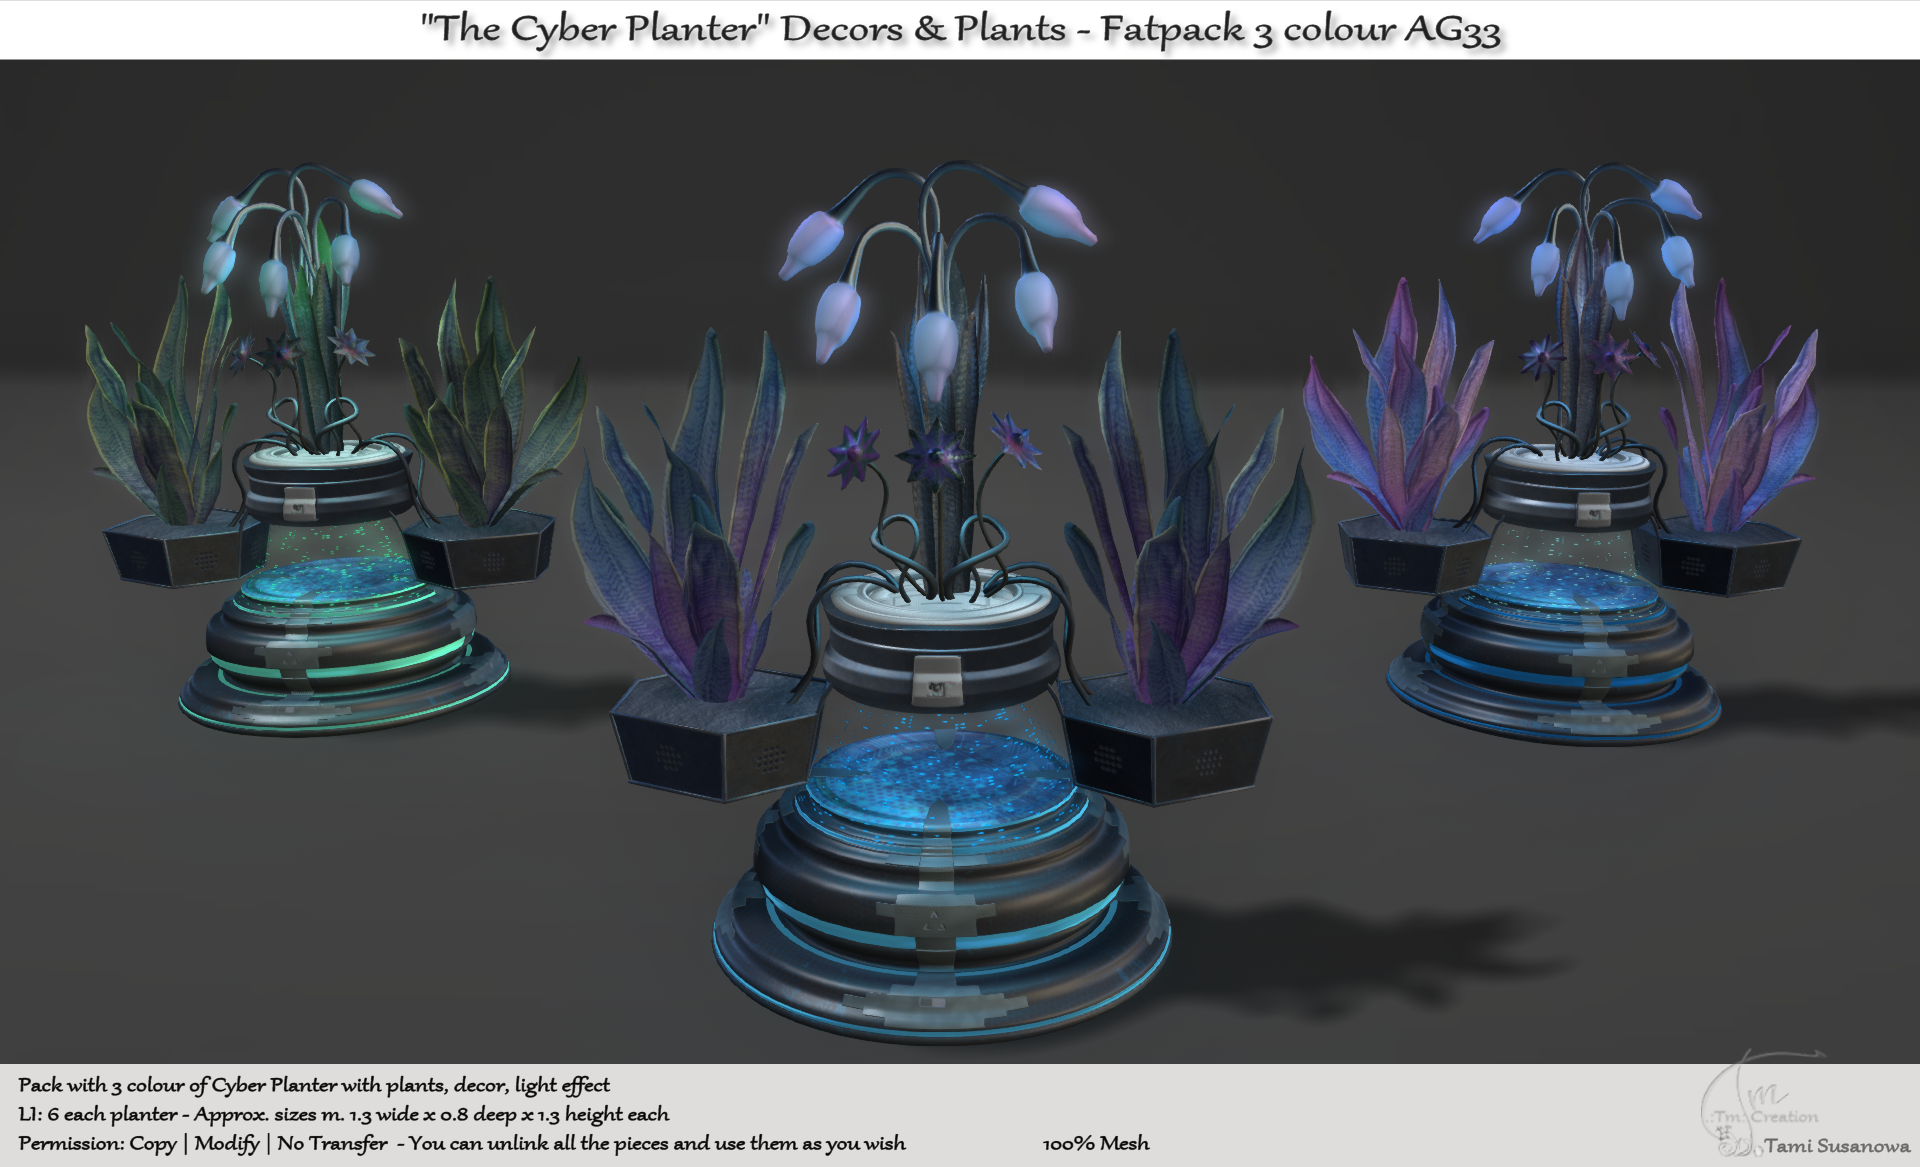 Tm Creation – “The Cyber Planter”